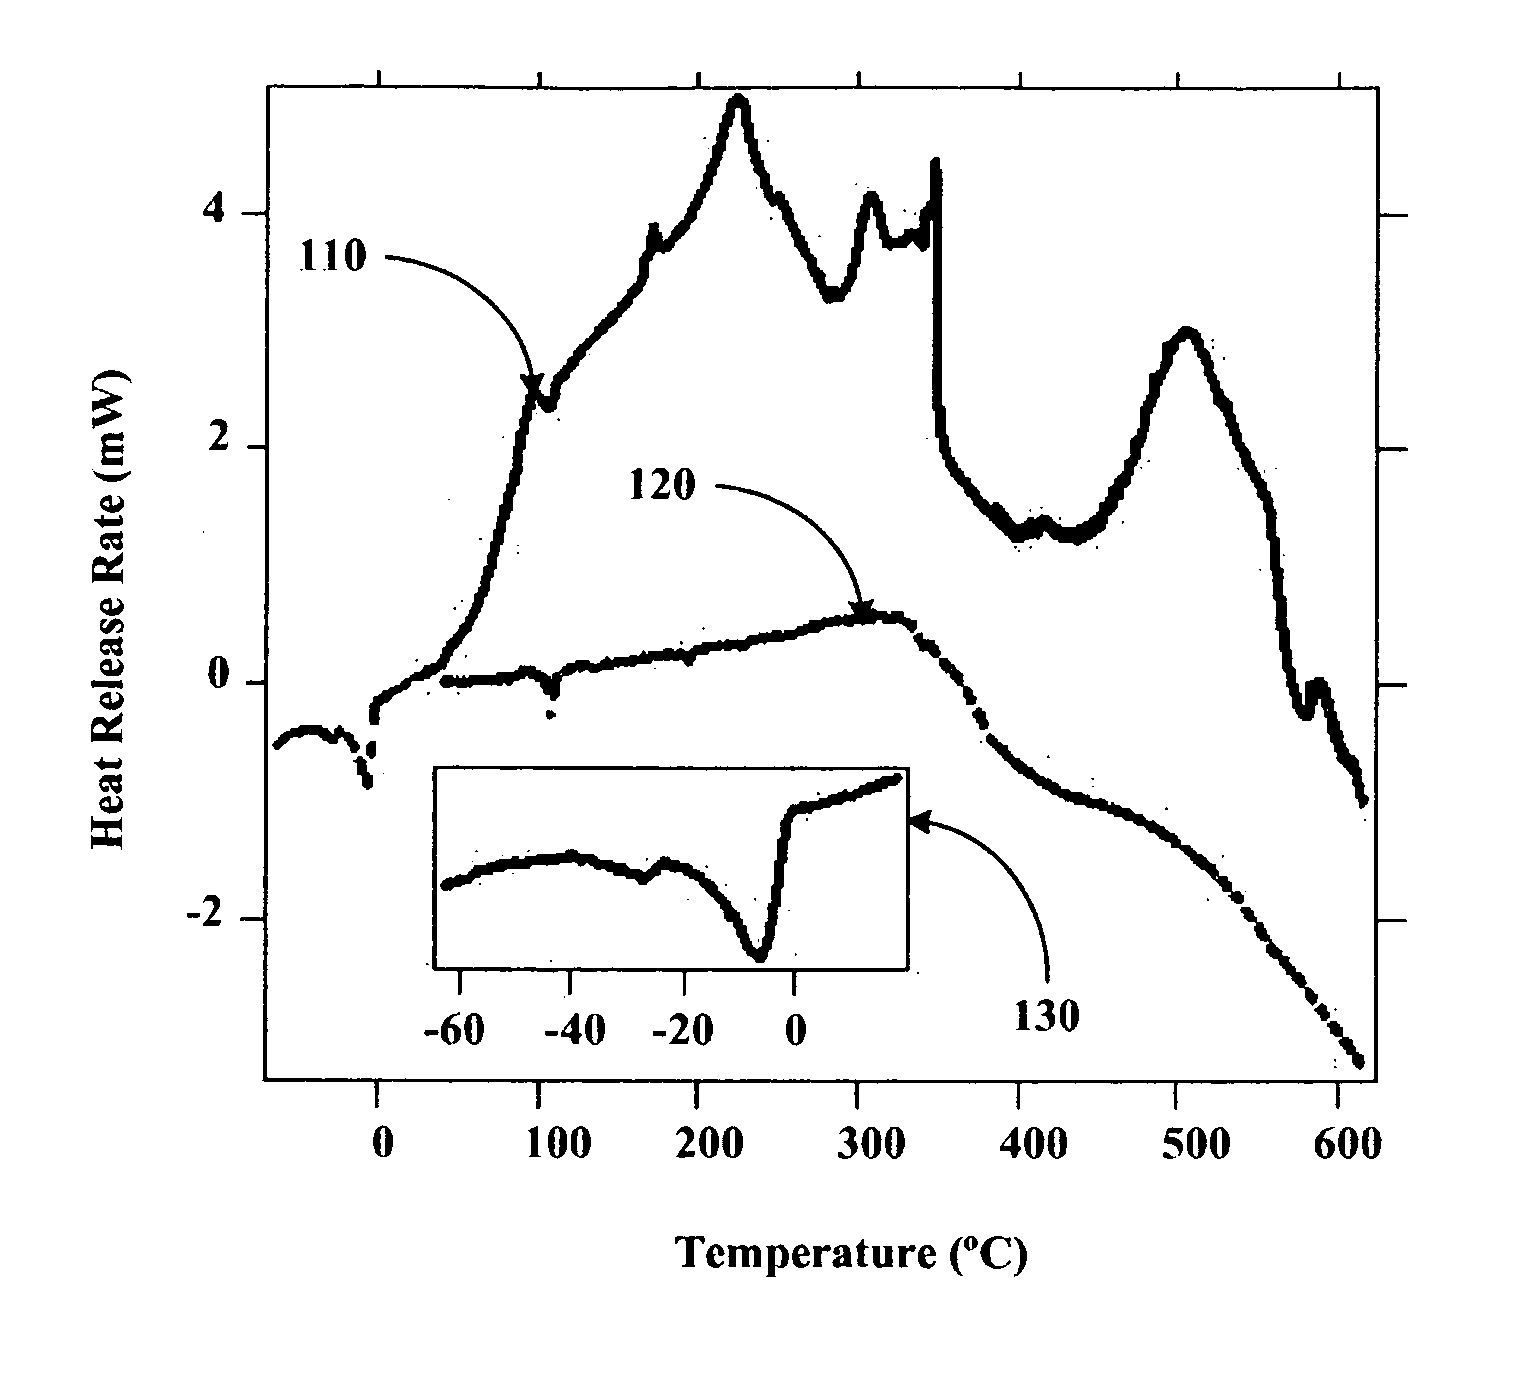 Silica gel compositions containing alkali metals and alkali metal alloys